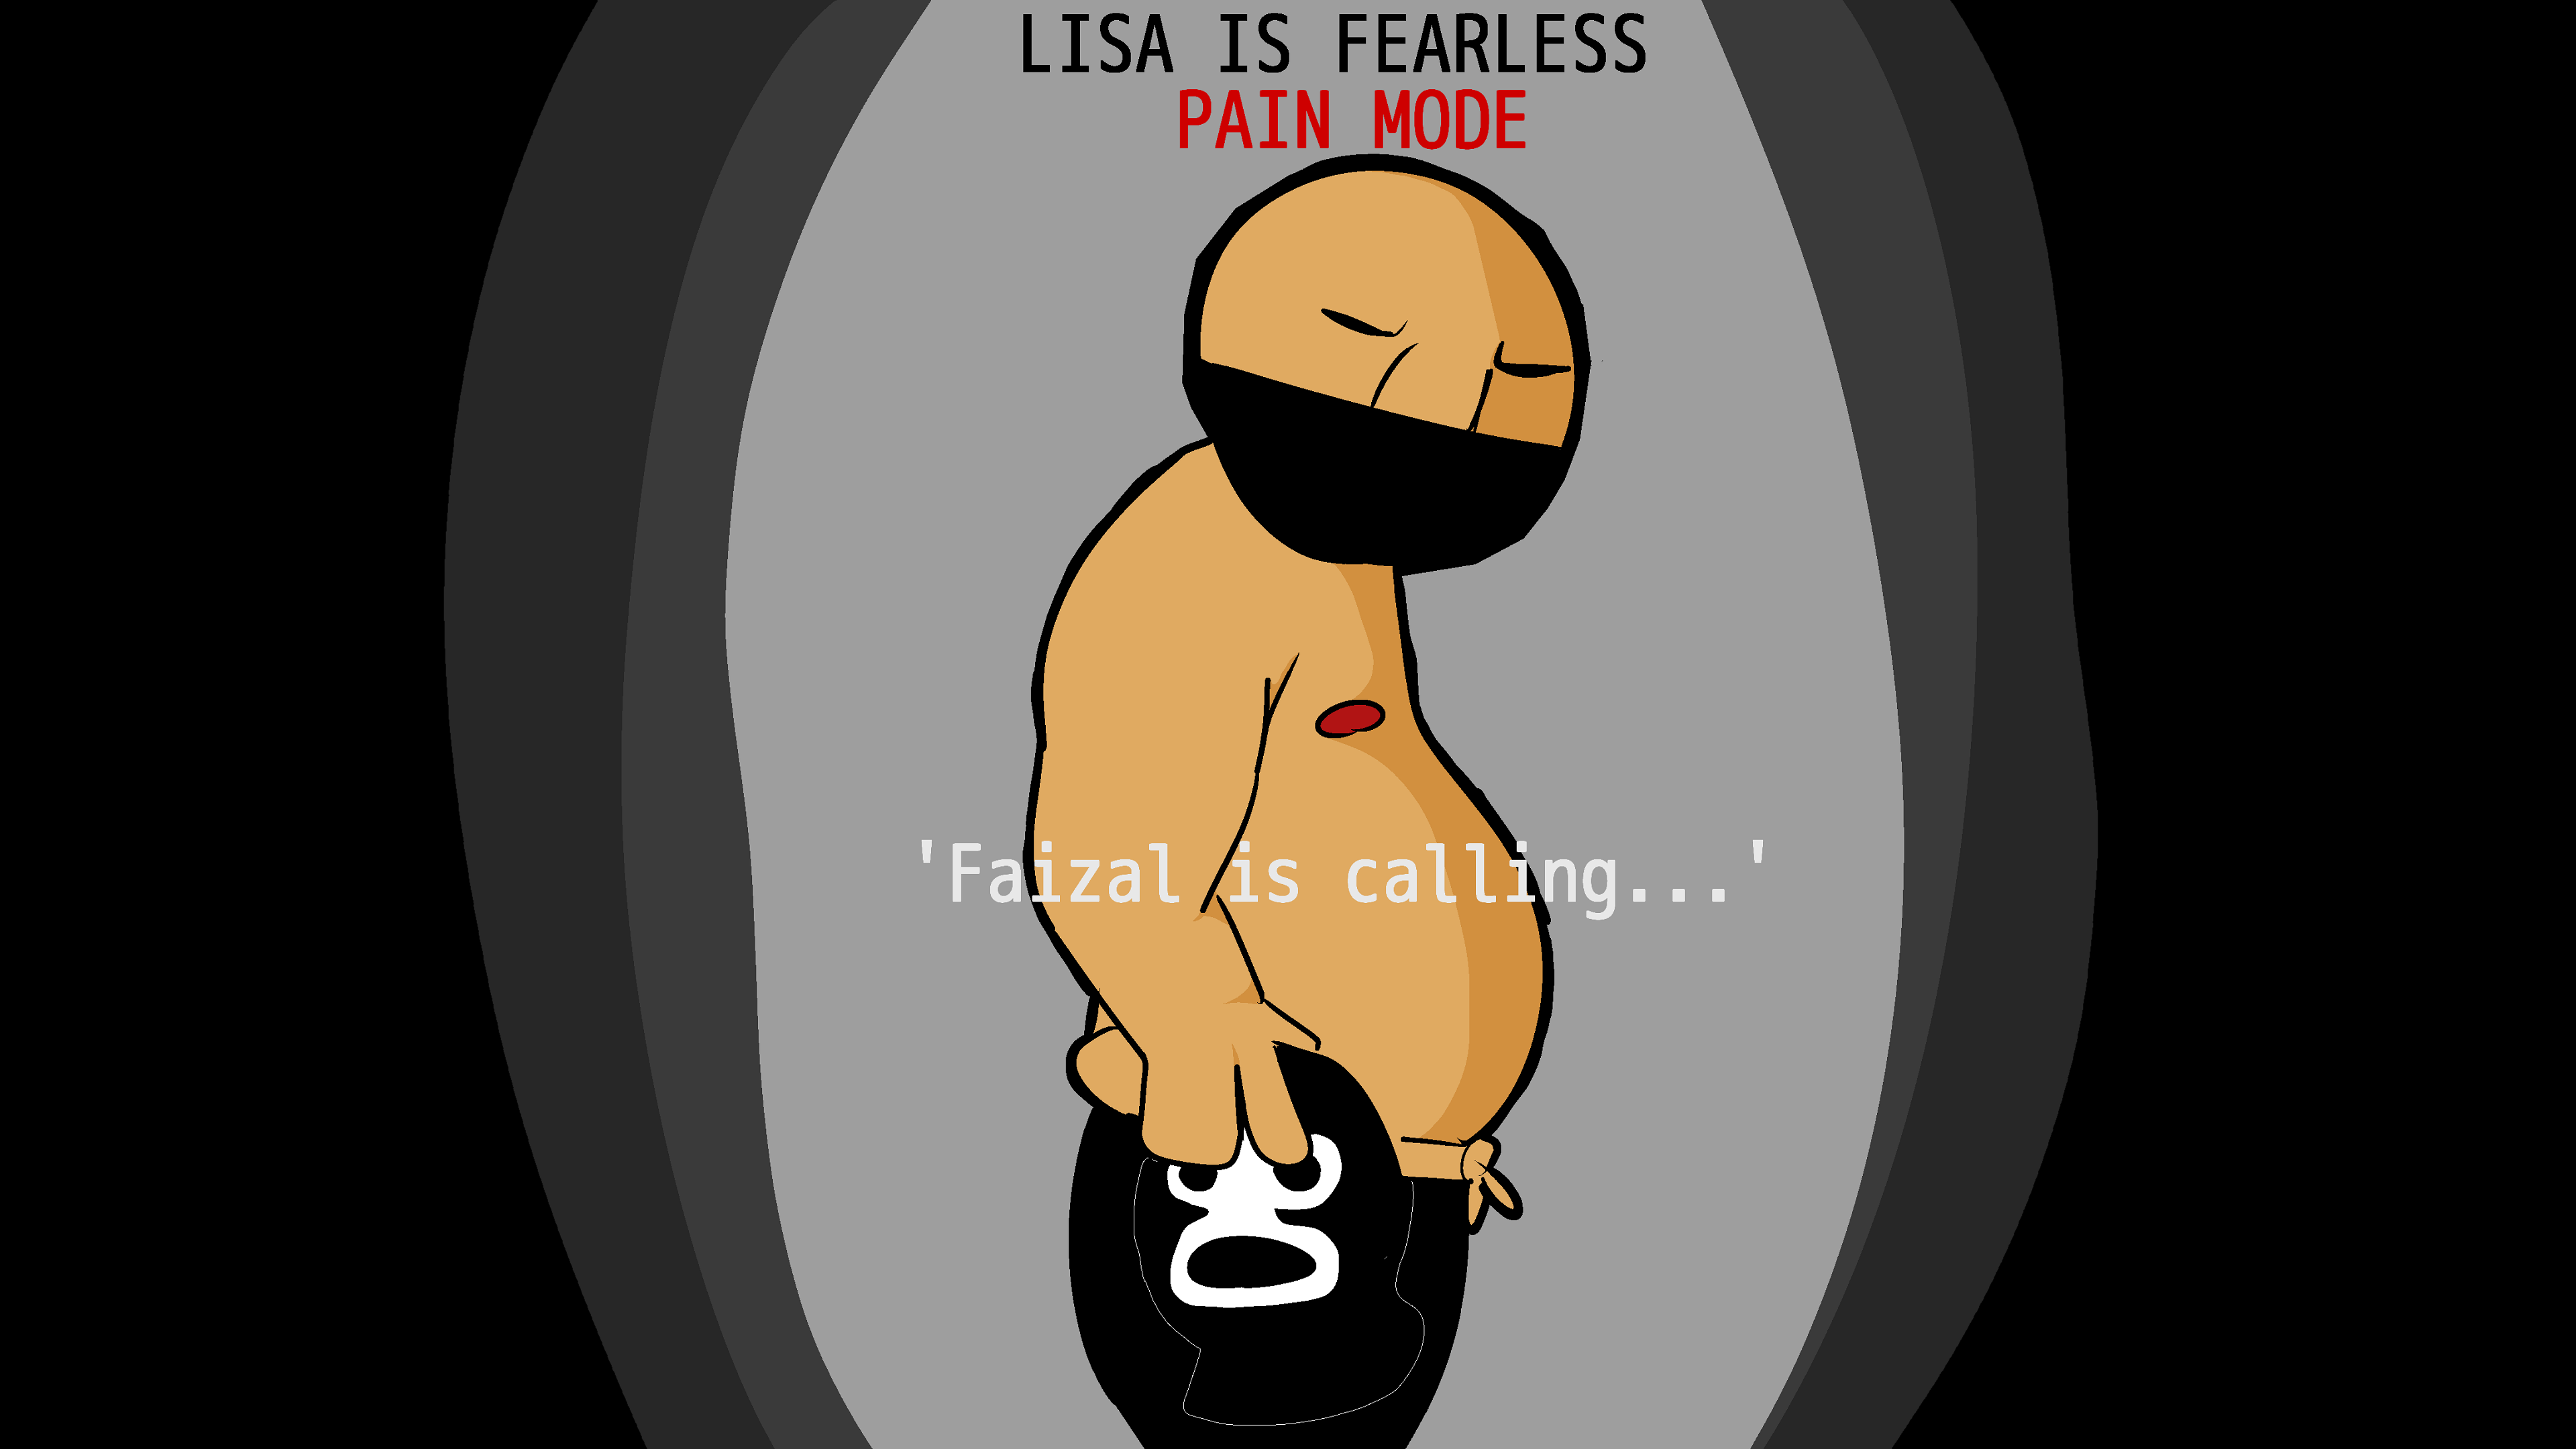 Lisa is Fearless: PAIN MODE